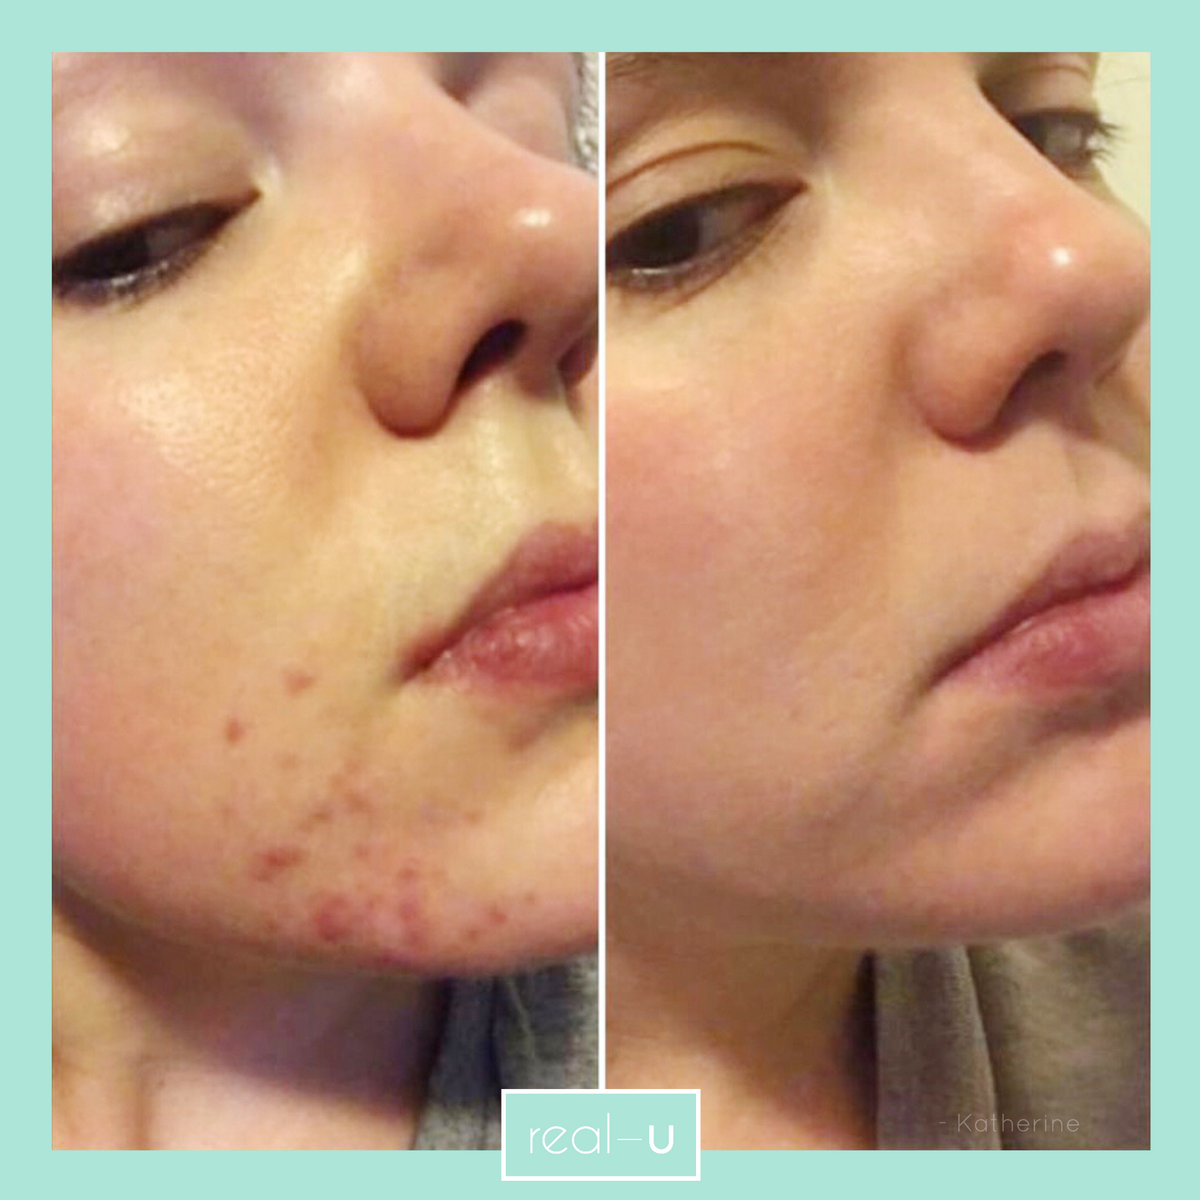 real-u acne skincare before and after pic